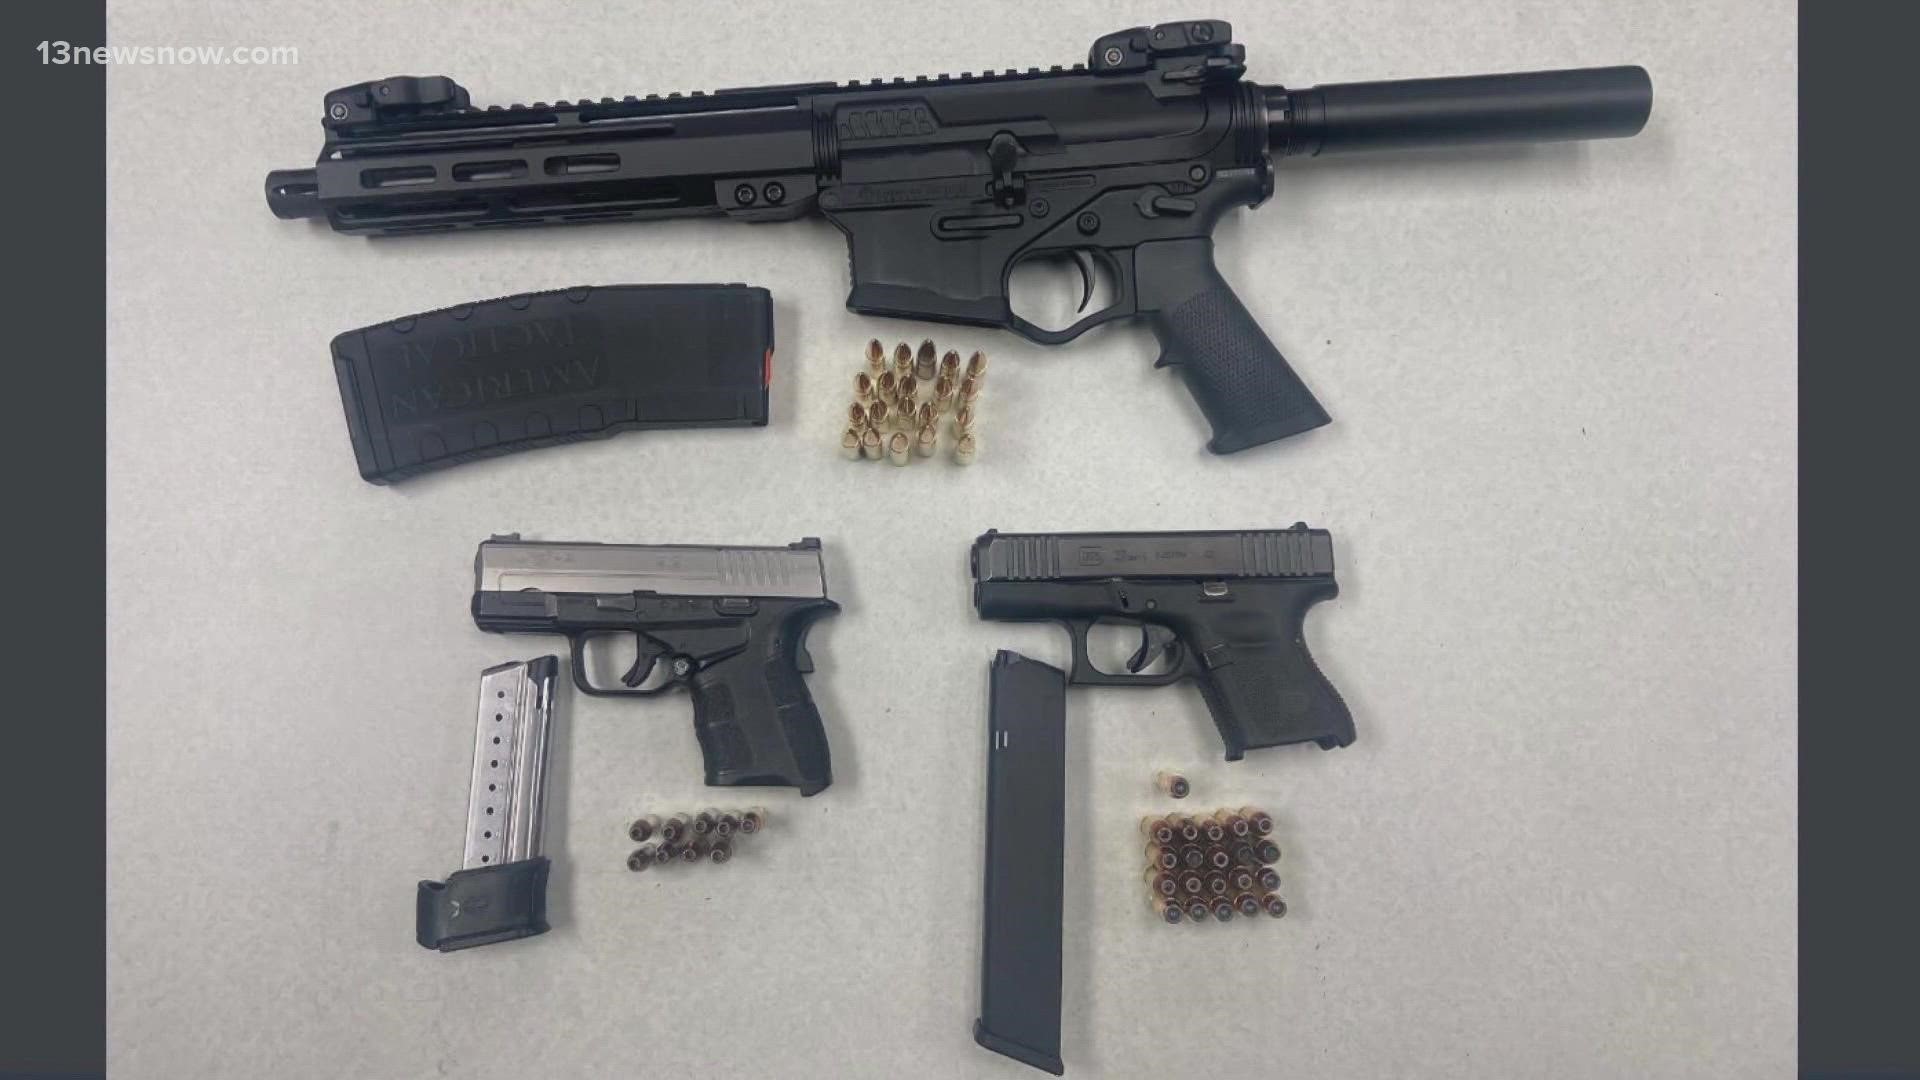 The Virginia Beach Police Department said officers confiscated five guns, bags of marijuana and edibles Saturday night after they pulled over several people.